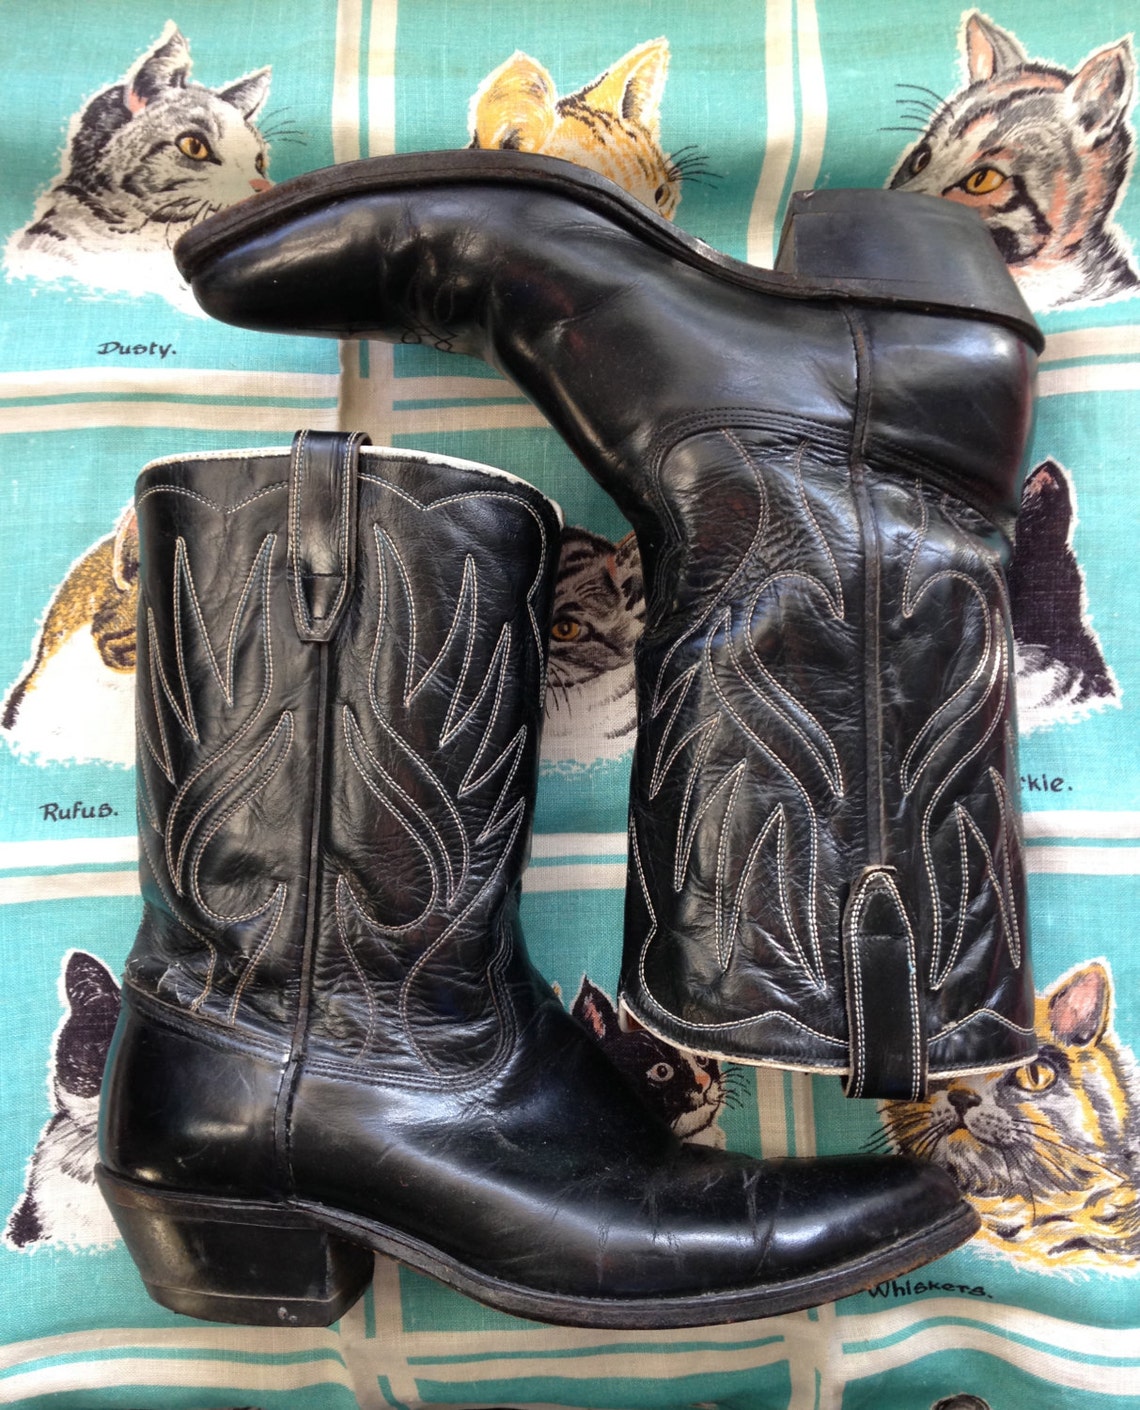 Vintage Boots 1960's Black Acme the Ace of Spades 60's - Etsy